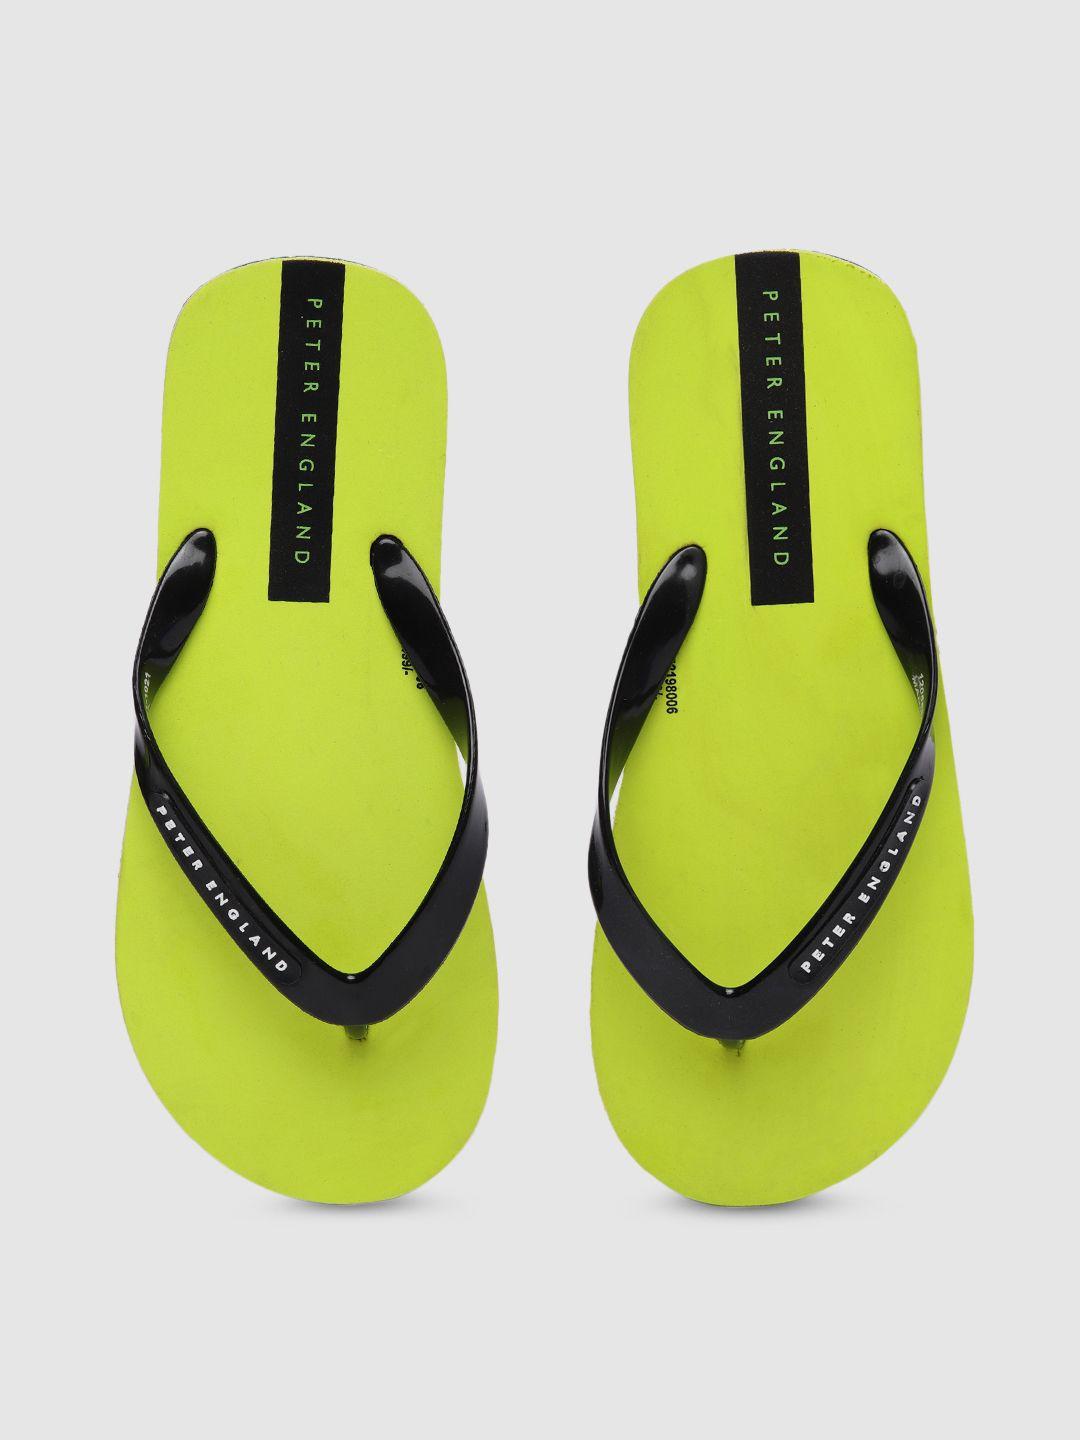 peter-england-men-lime-green-&-black-solid-rubber-thong-flip-flops-with-brand-logo-printed